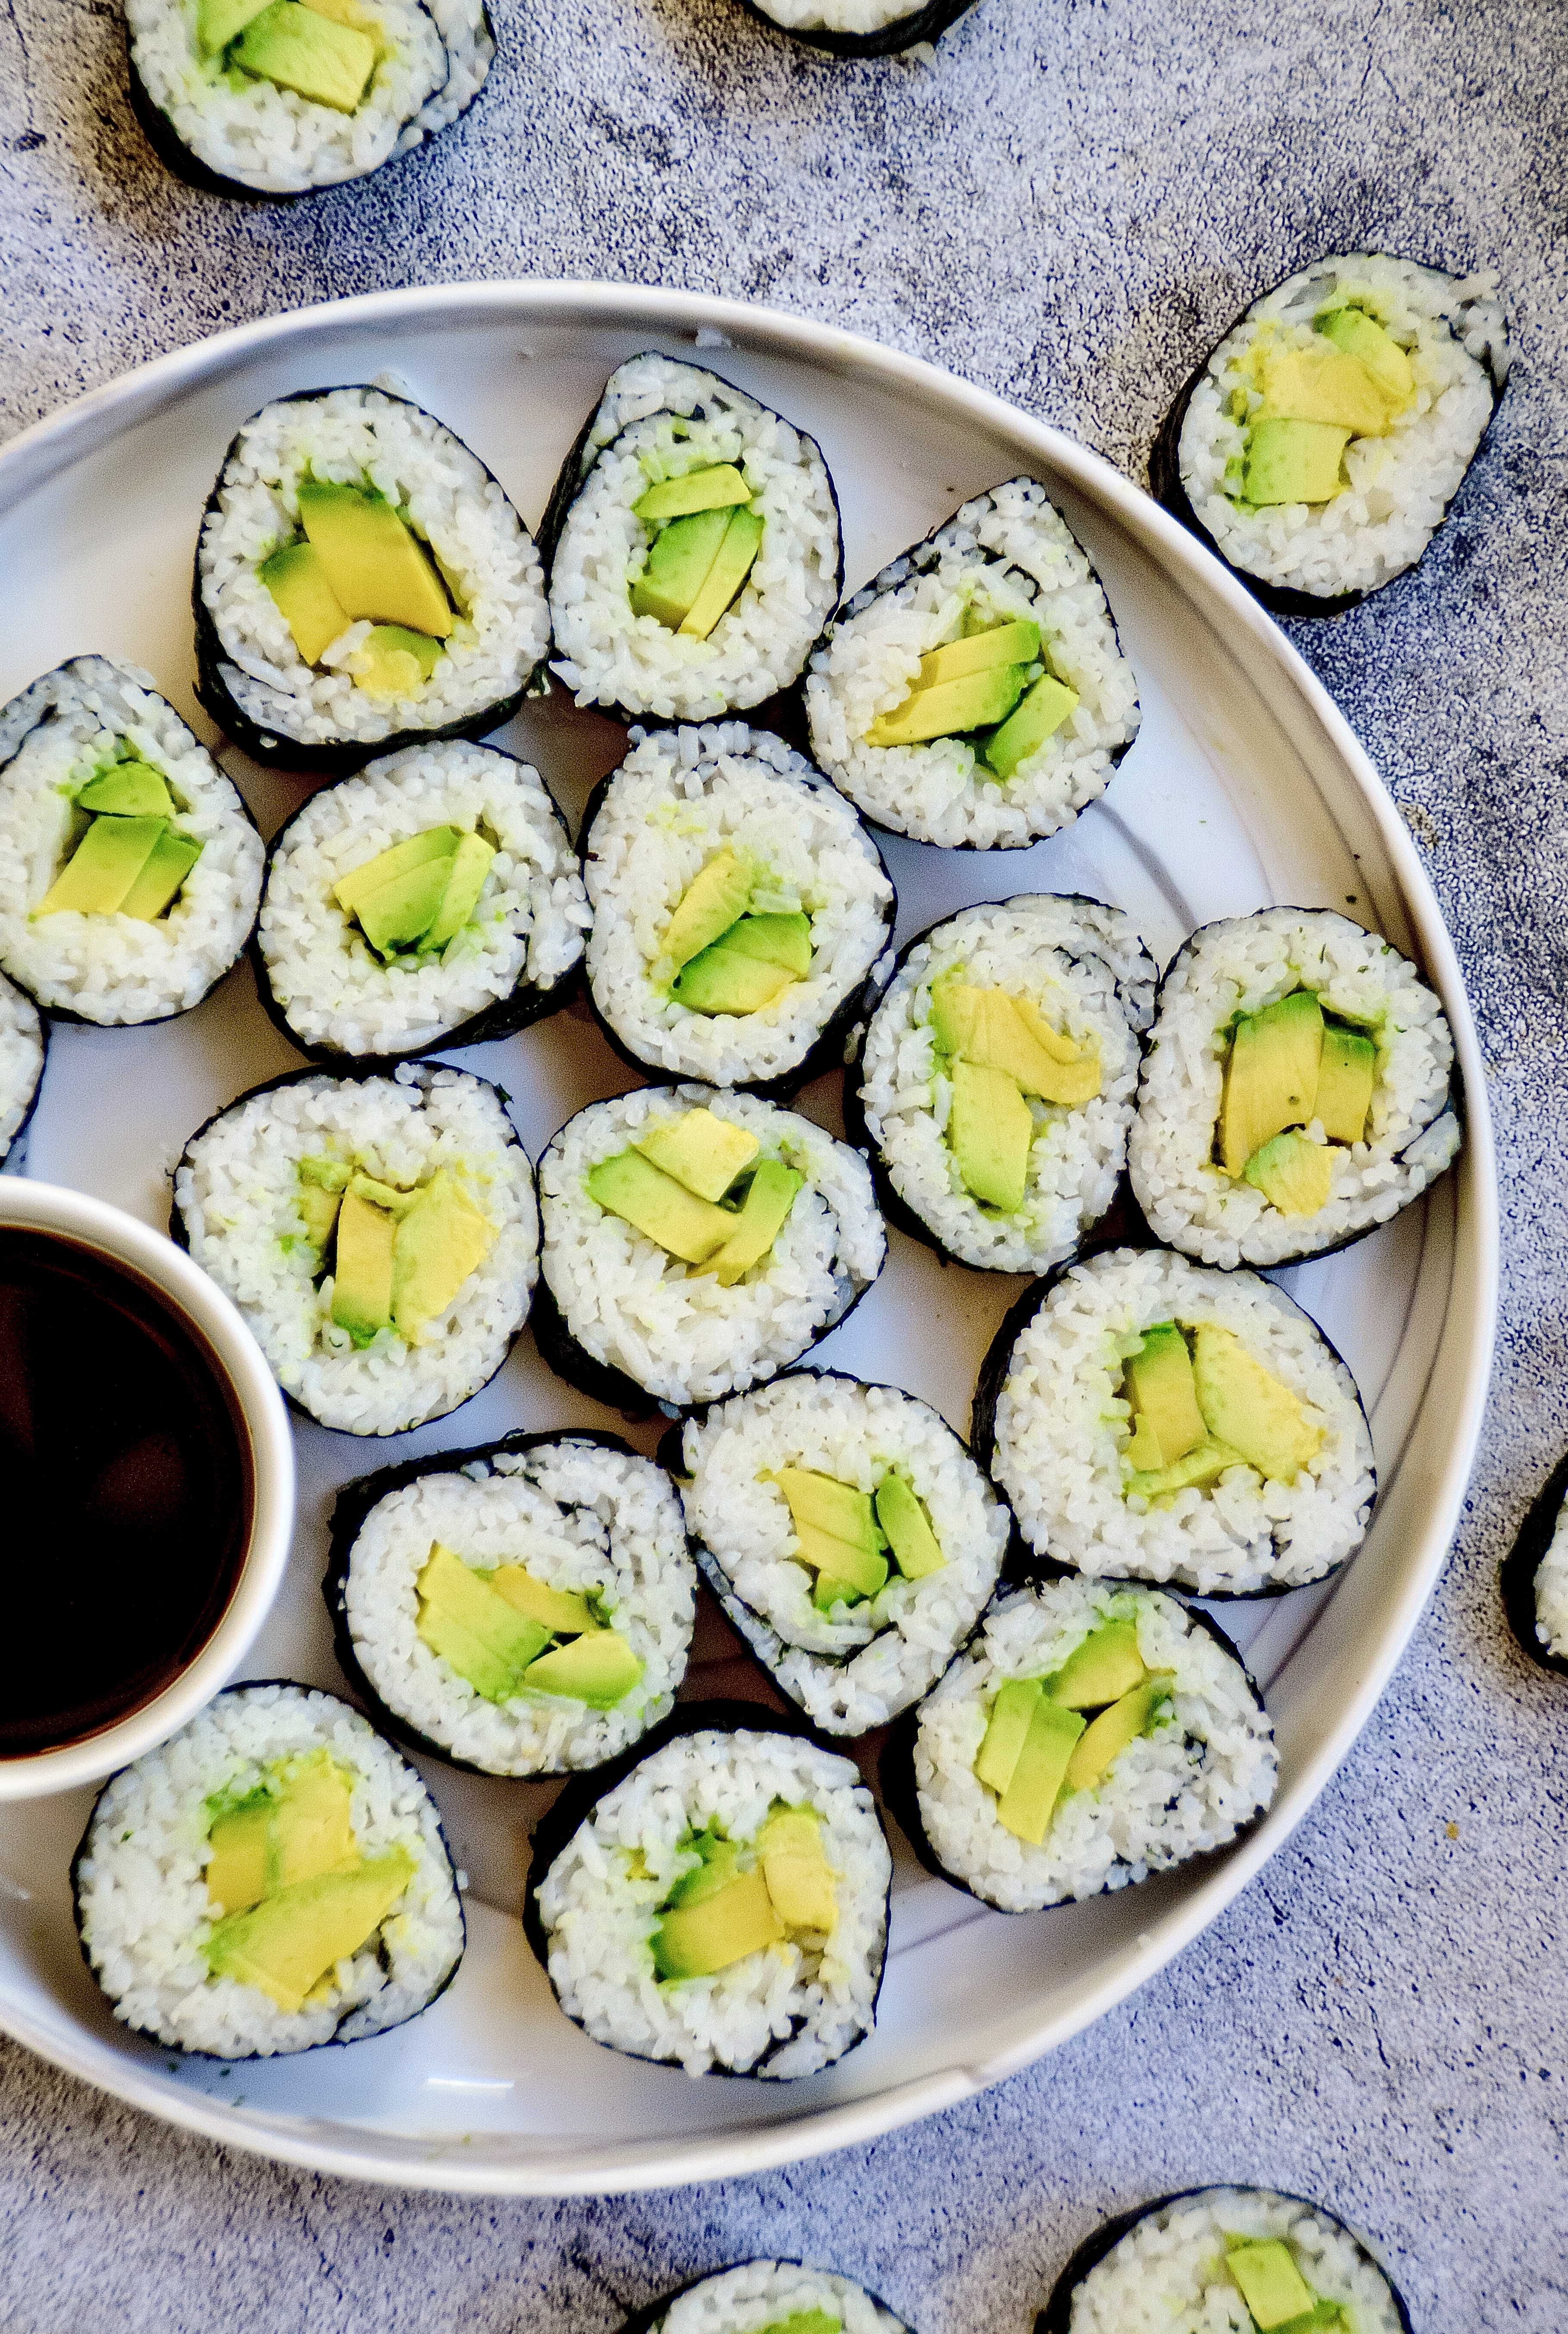 Best Sushi Recipes- How To Make Sushi Rolls At Home